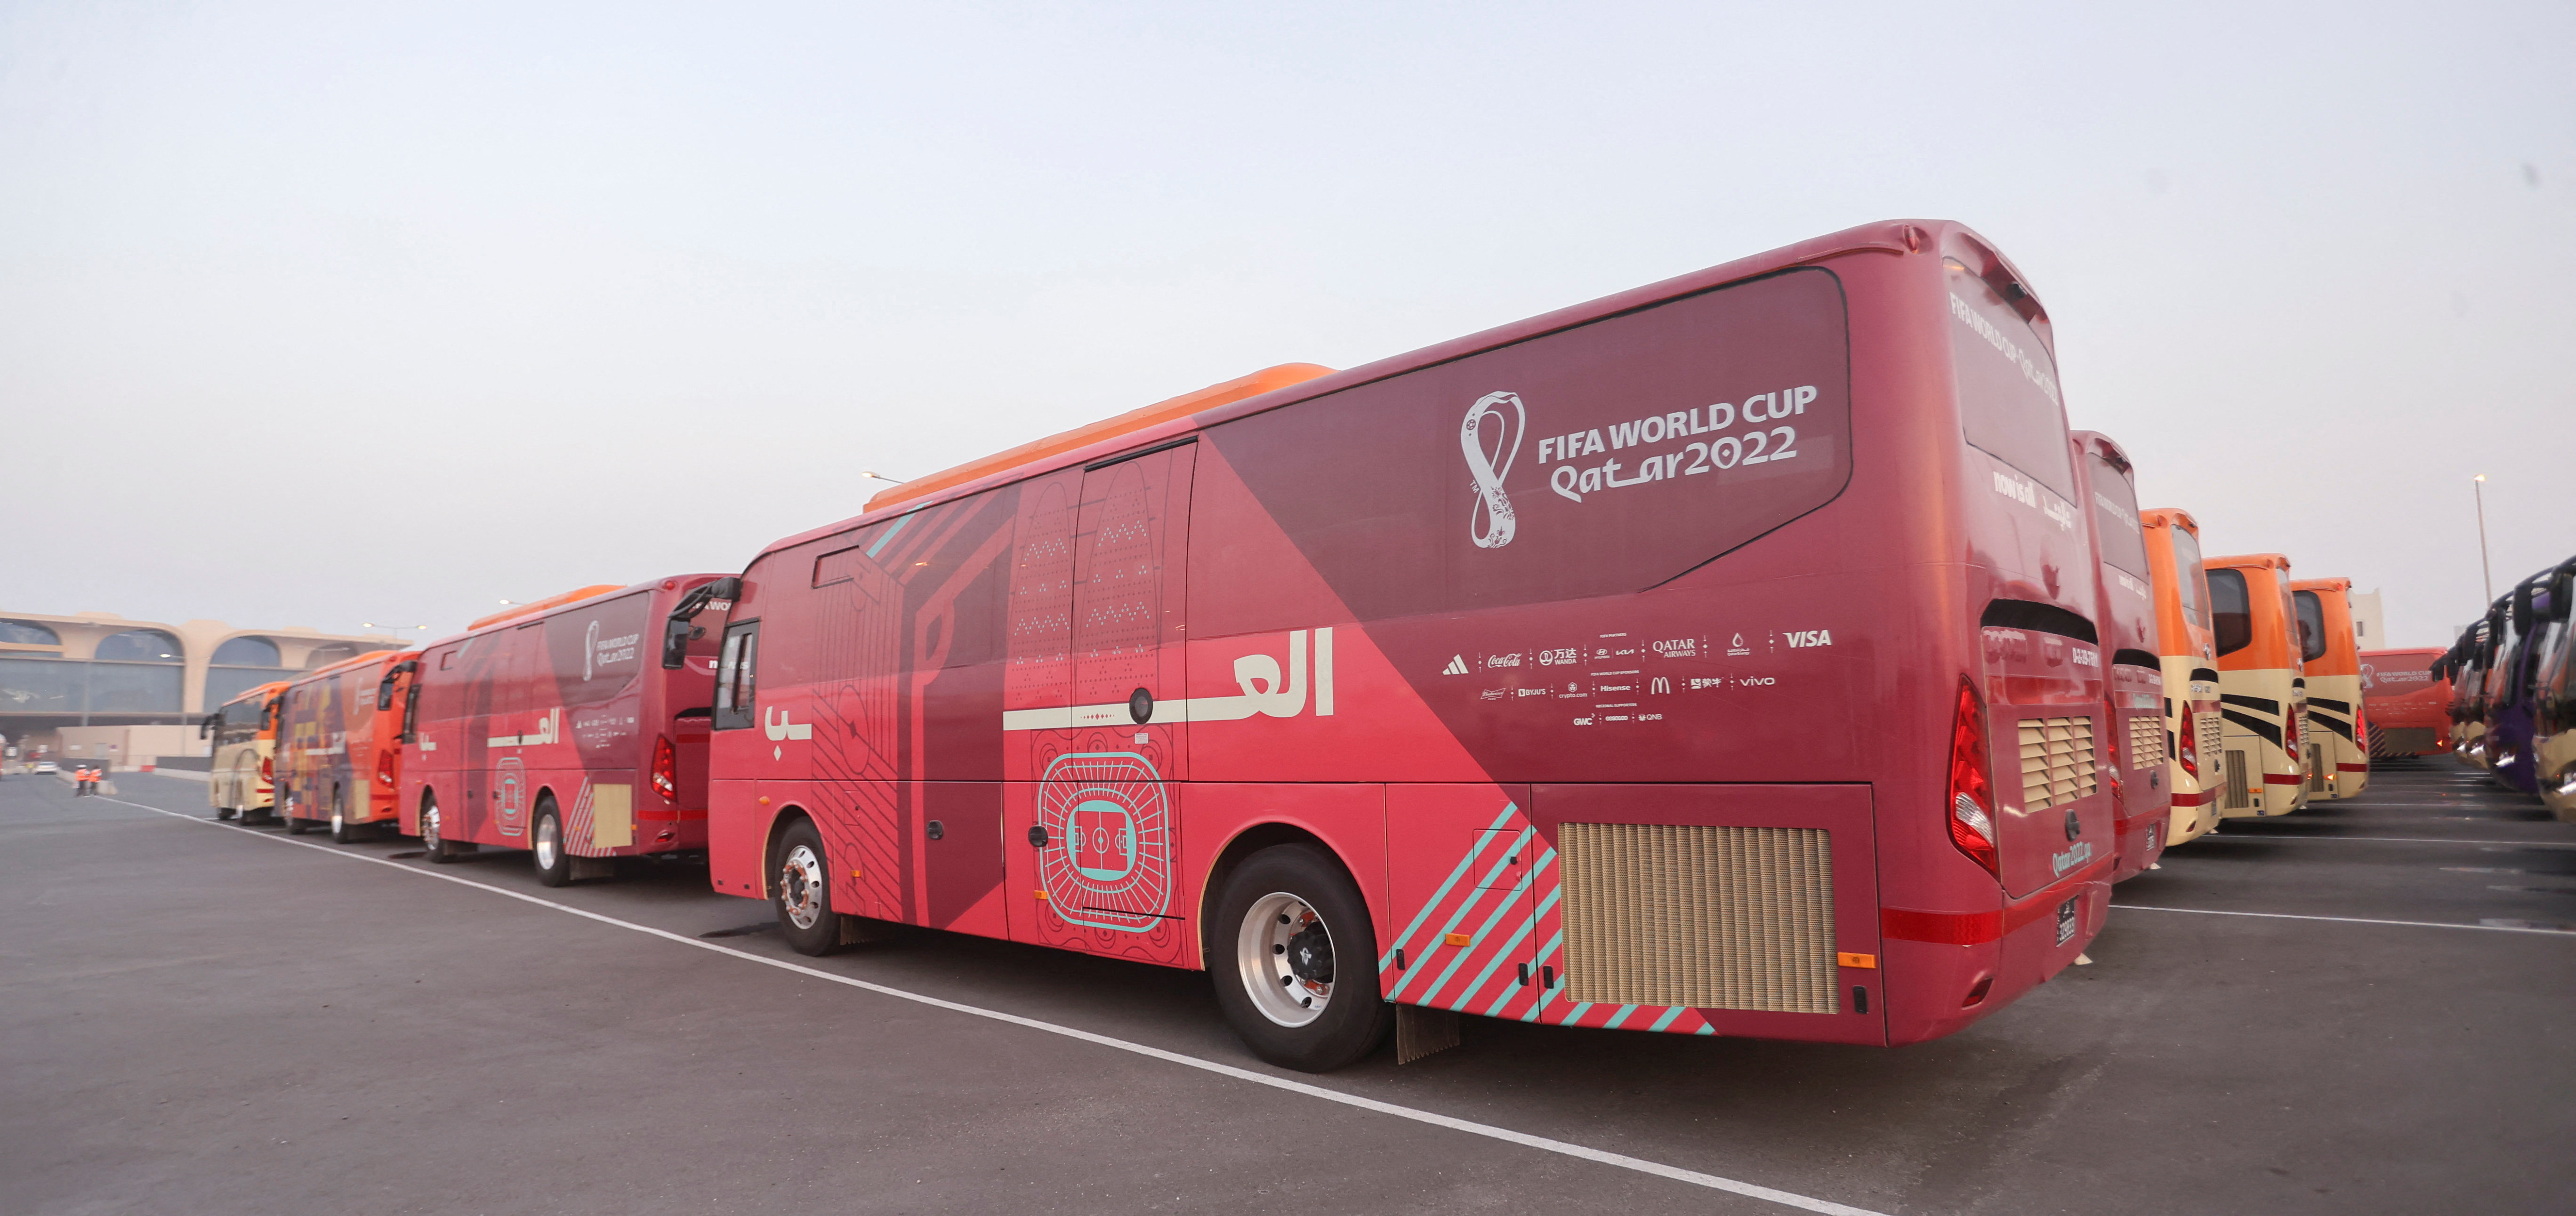 Buses which will be used for transportation for the FIFA World Cup Qatar 2022 are seen parked at a bus stop in Al Wakrah, during a "Bus Service Test Day Operation" connecting different soccer stadiums, ahead of the FIFA World Cup Qatar 2022 later this year, in Doha, Qatar, August 18, 2022. REUTERS/Ibraheem Al Omari